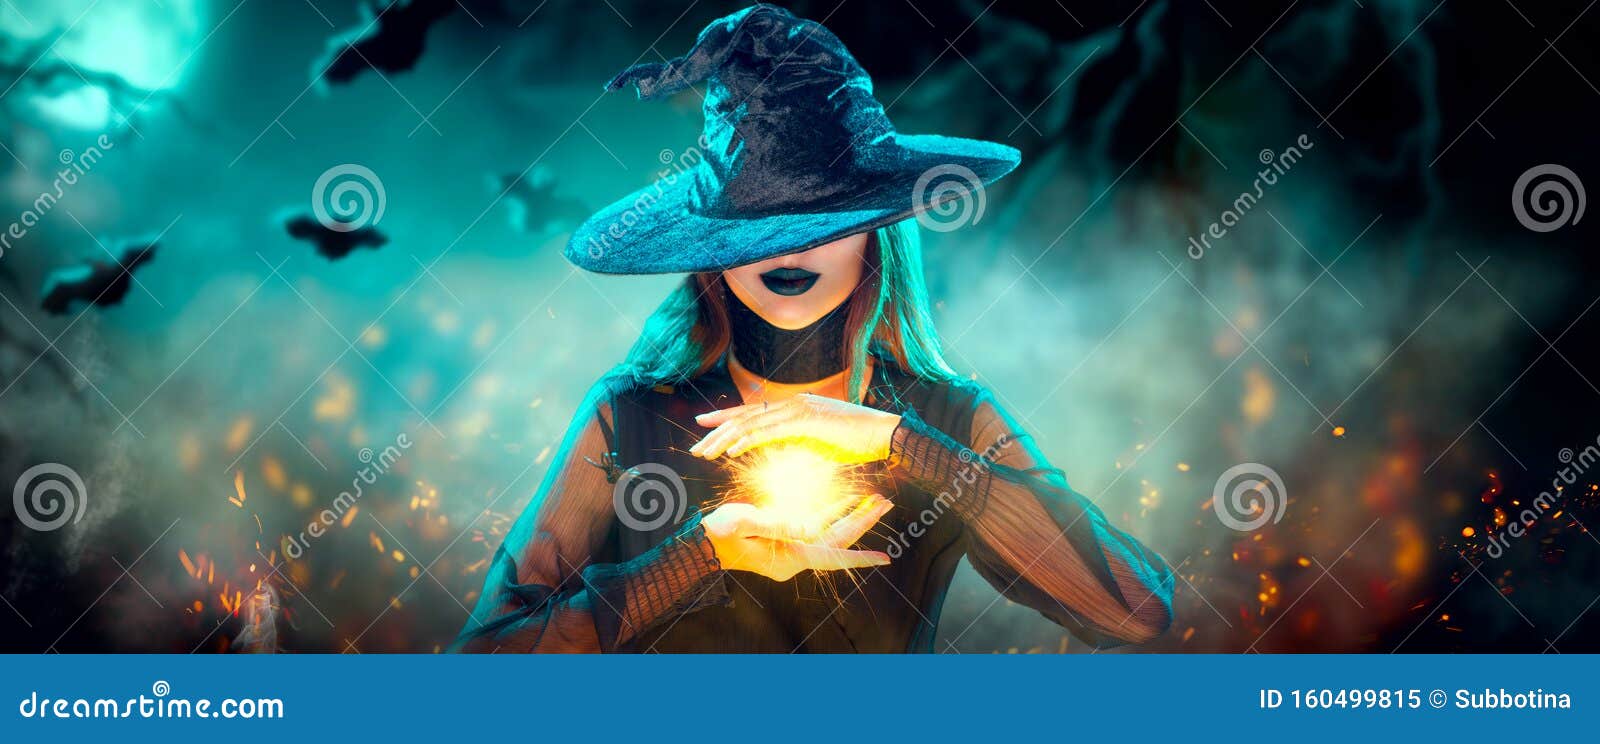 halloween witch girl with making witchcraft, magic in her hands, spells. beautiful young woman in witches hat conjuring